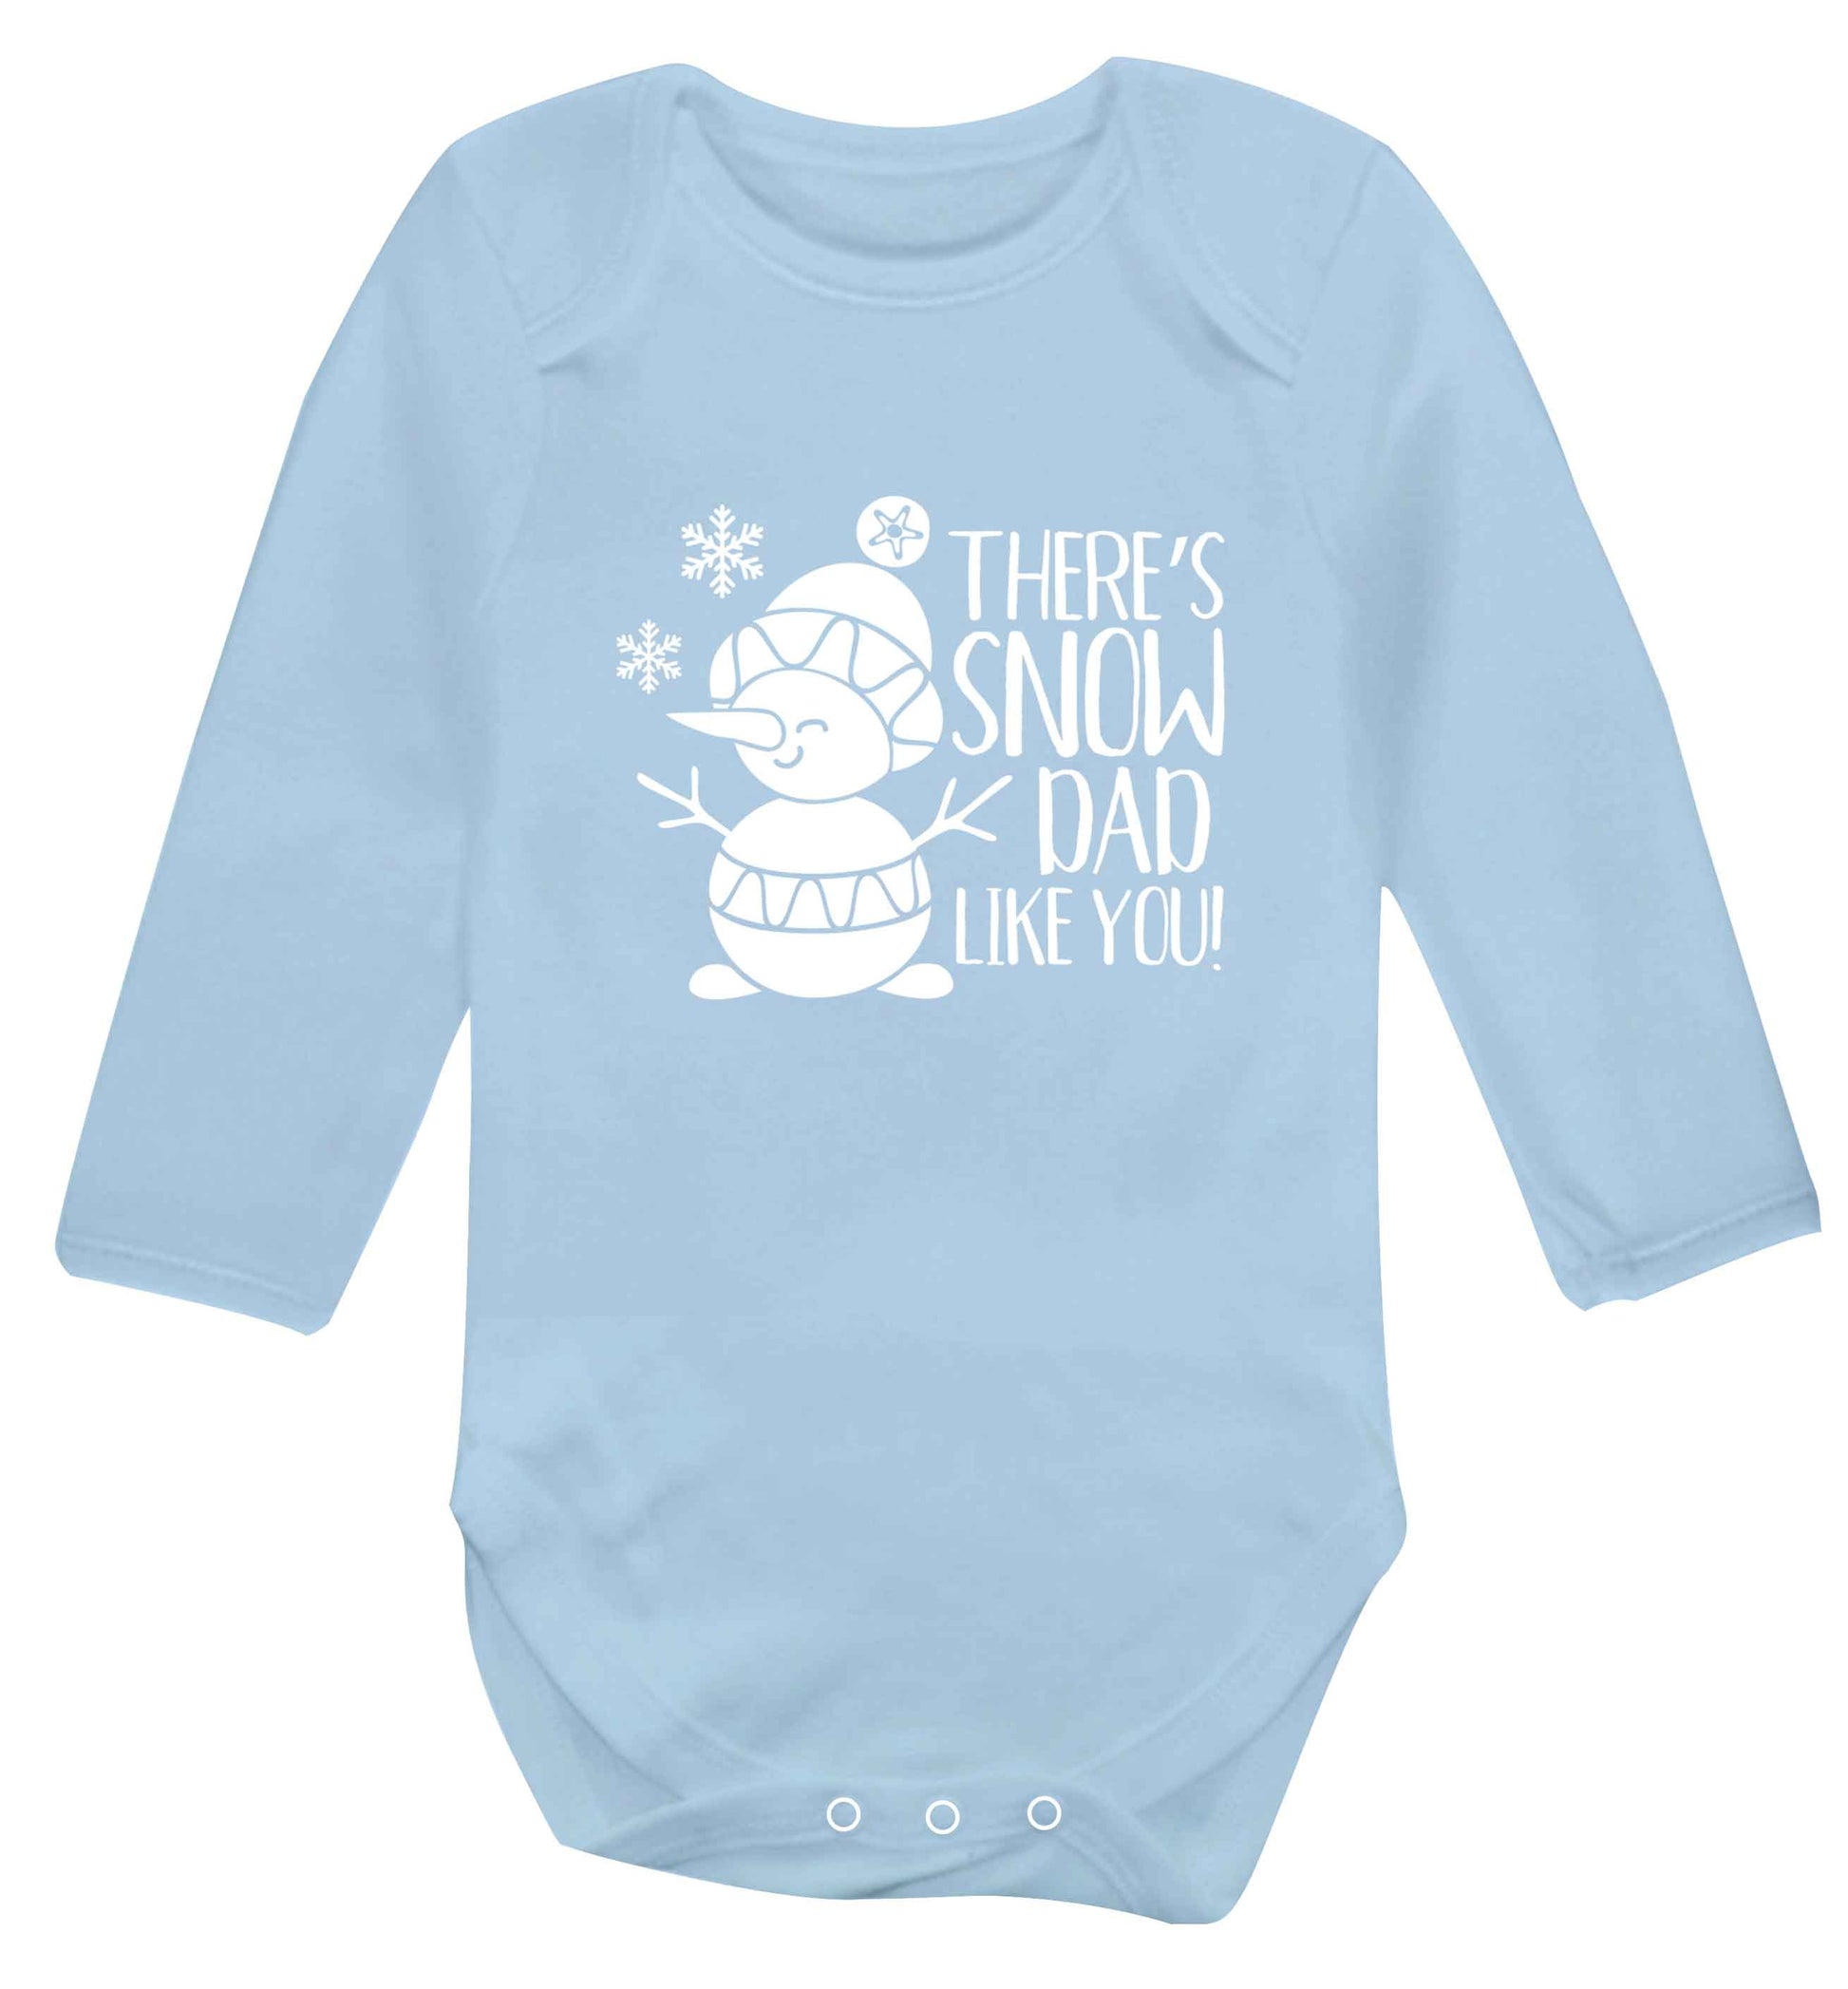 There's snow dad like you baby vest long sleeved pale blue 6-12 months